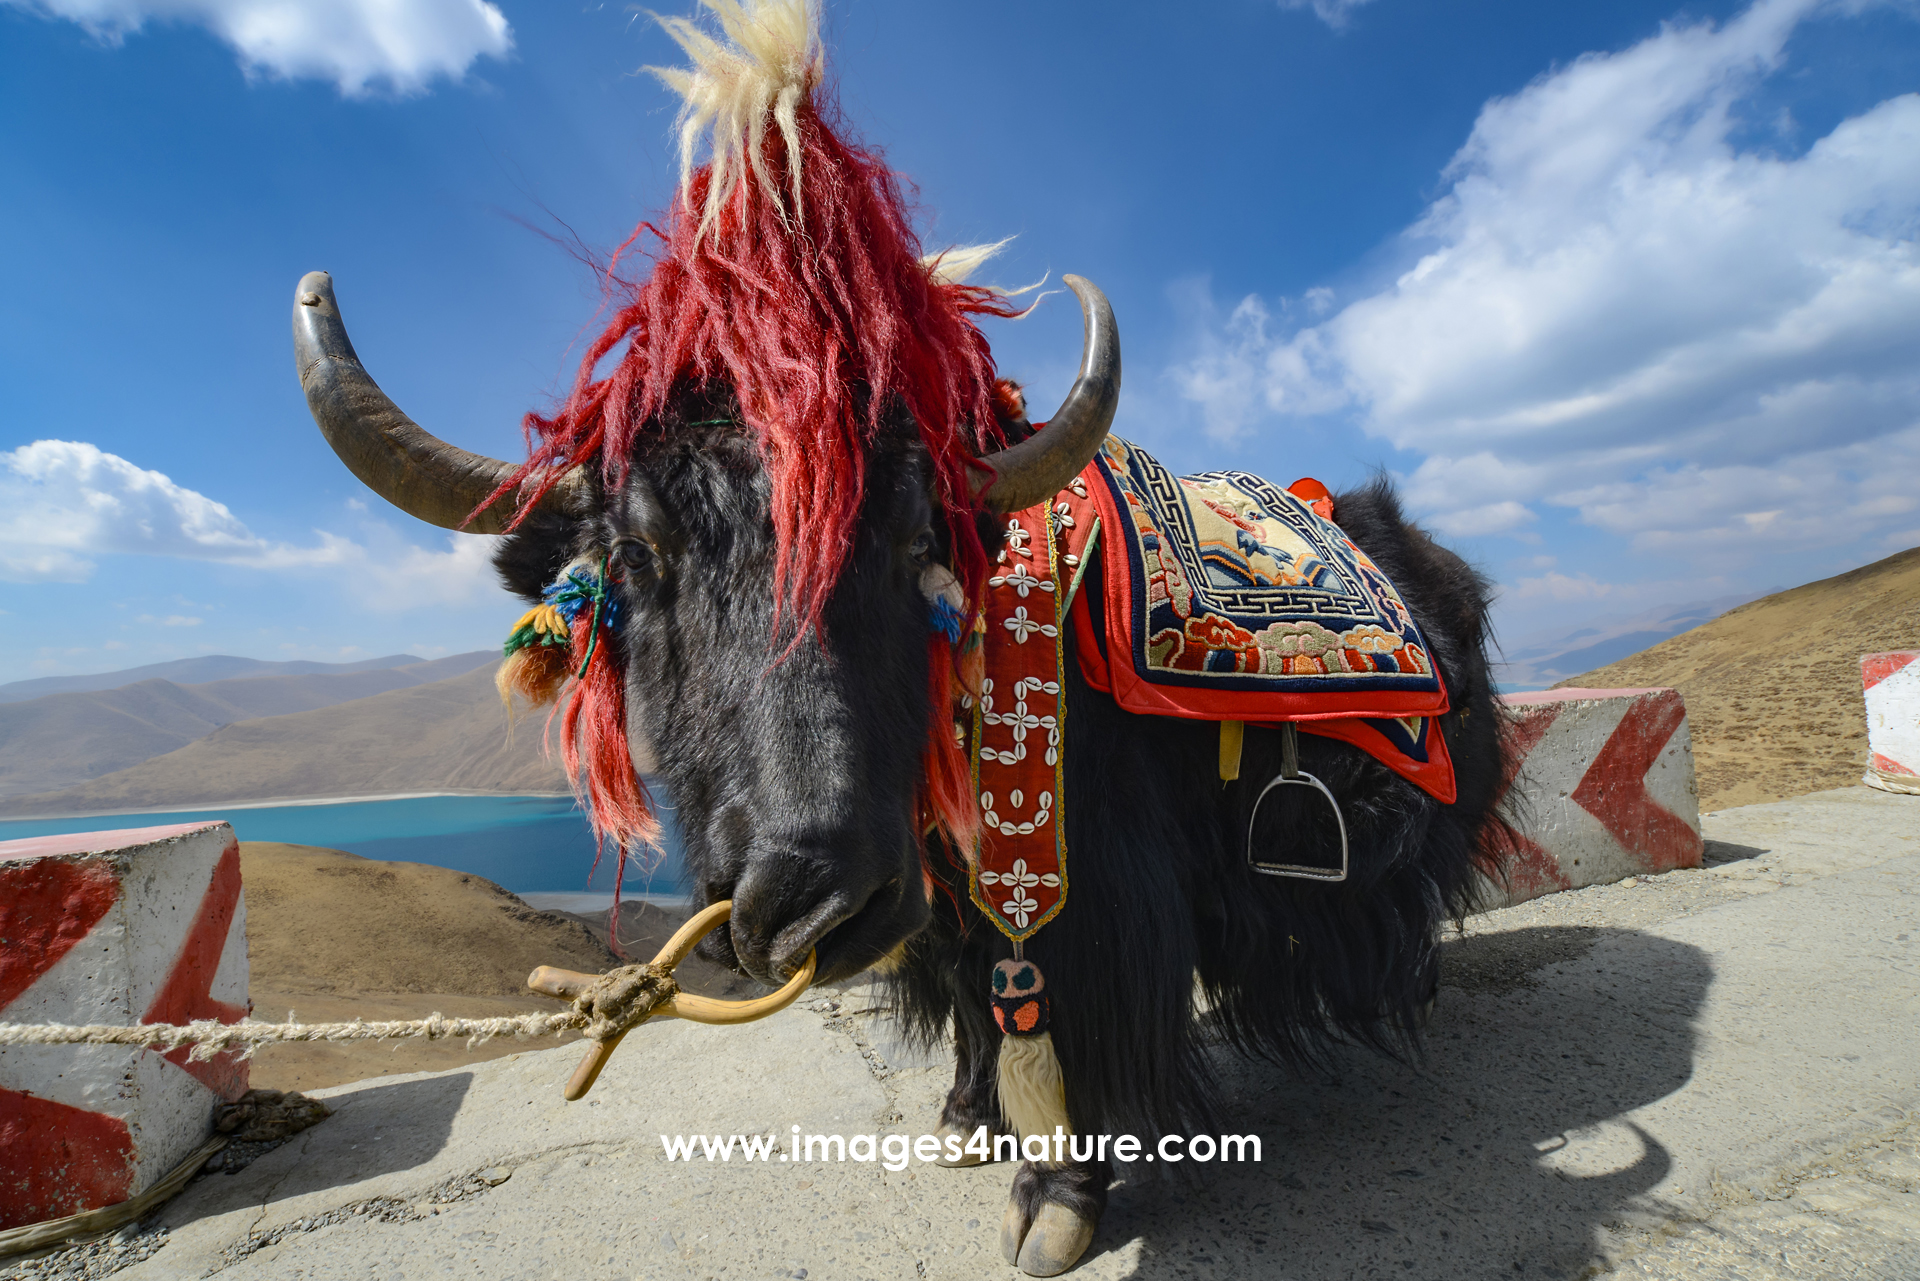 Beautifully decorated Tibetan Yak standing on the edge of a mountain road